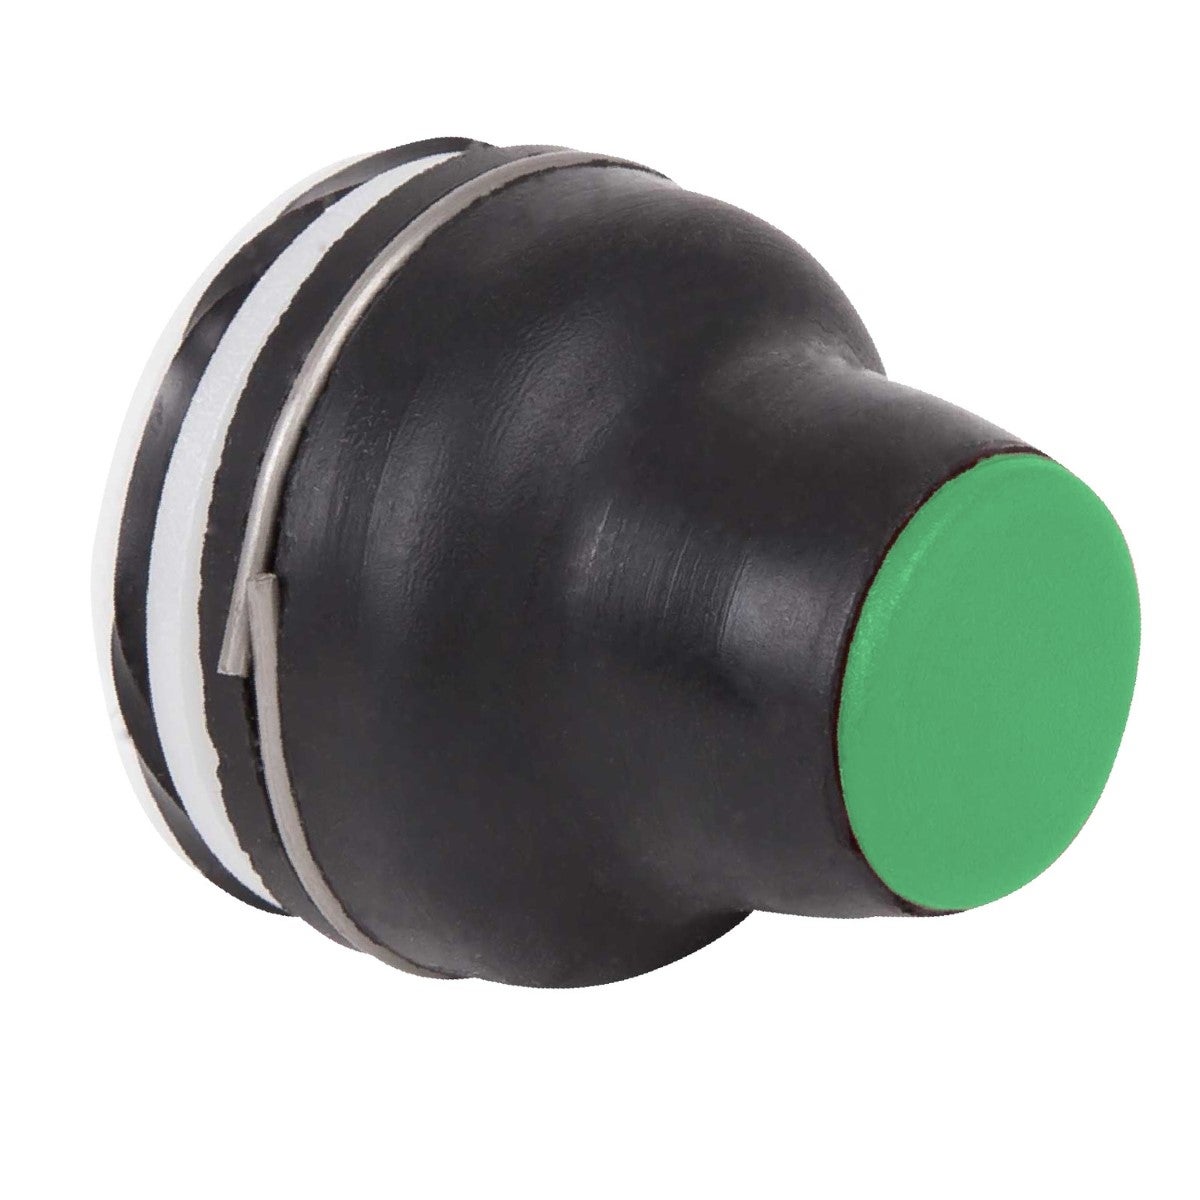 booted head for pushbutton XAC-B - green - 4 mm, -25..+70 °C